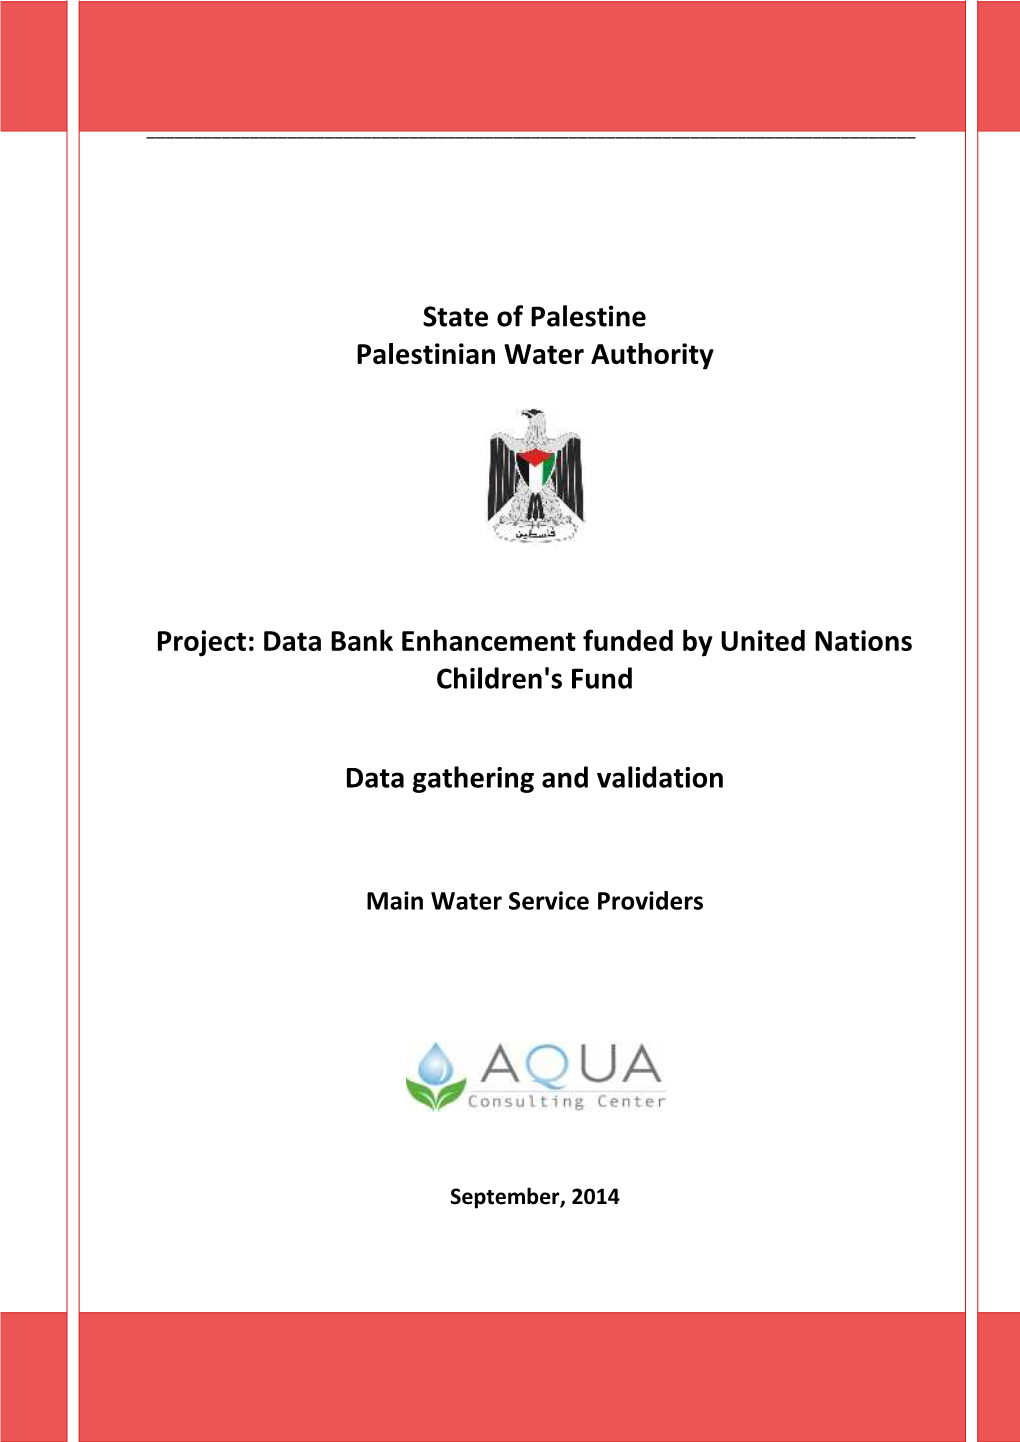 Data Bank Enhancement Funded by United Nations Children's Fund Data Gathering and Validation